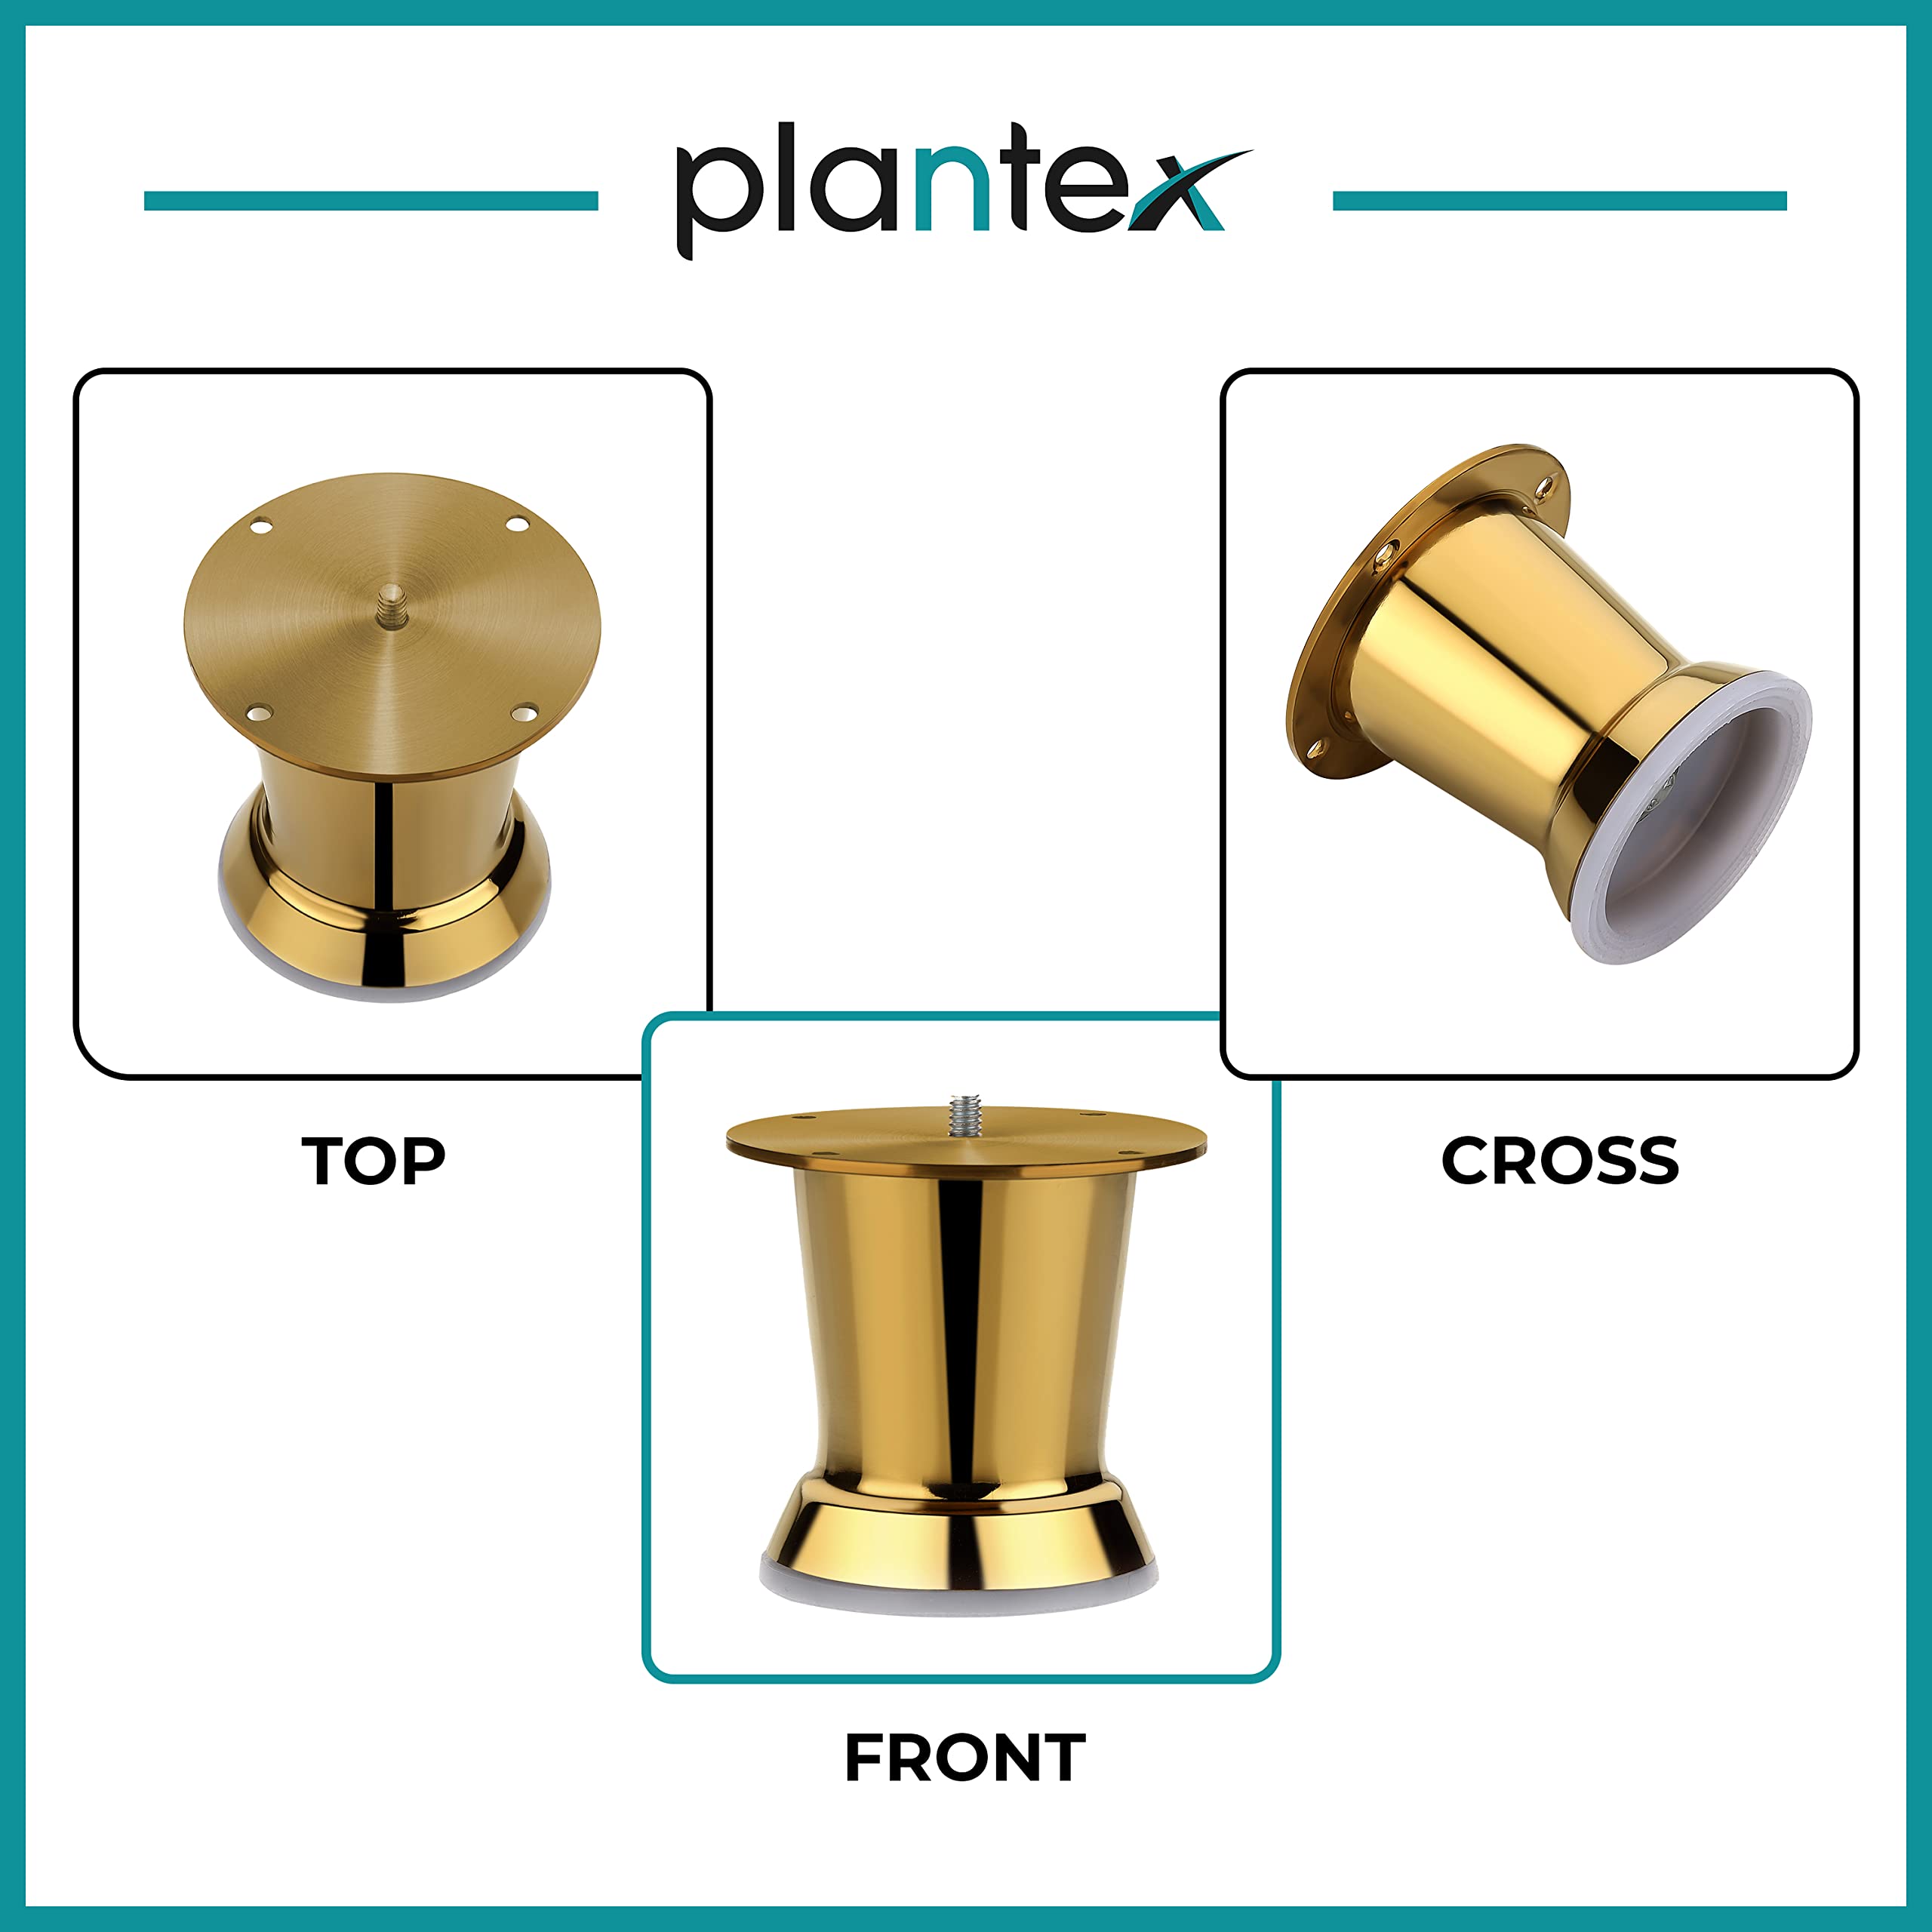 Plantex Heavy Duty Stainless Steel 3 inch Sofa Leg/Bed Furniture Leg Pair for Home Furnitures (DTS-51, Gold) – 6 Pcs